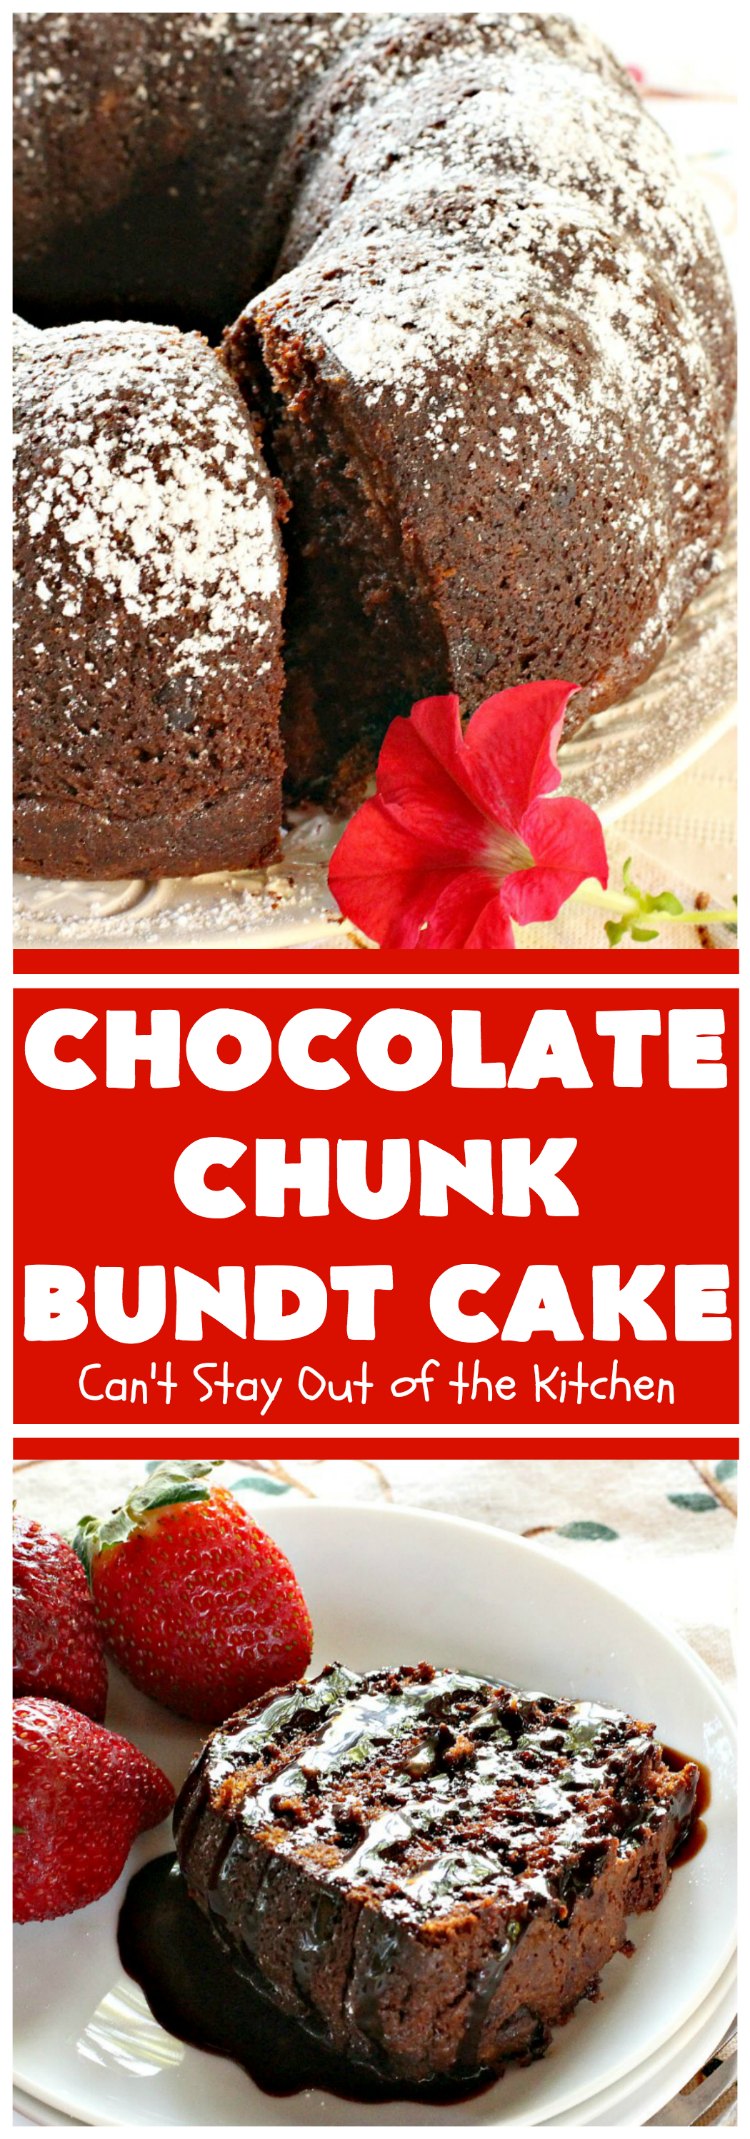 Chocolate Chunk Bundt Cake | Can't Stay Out of the Kitchen